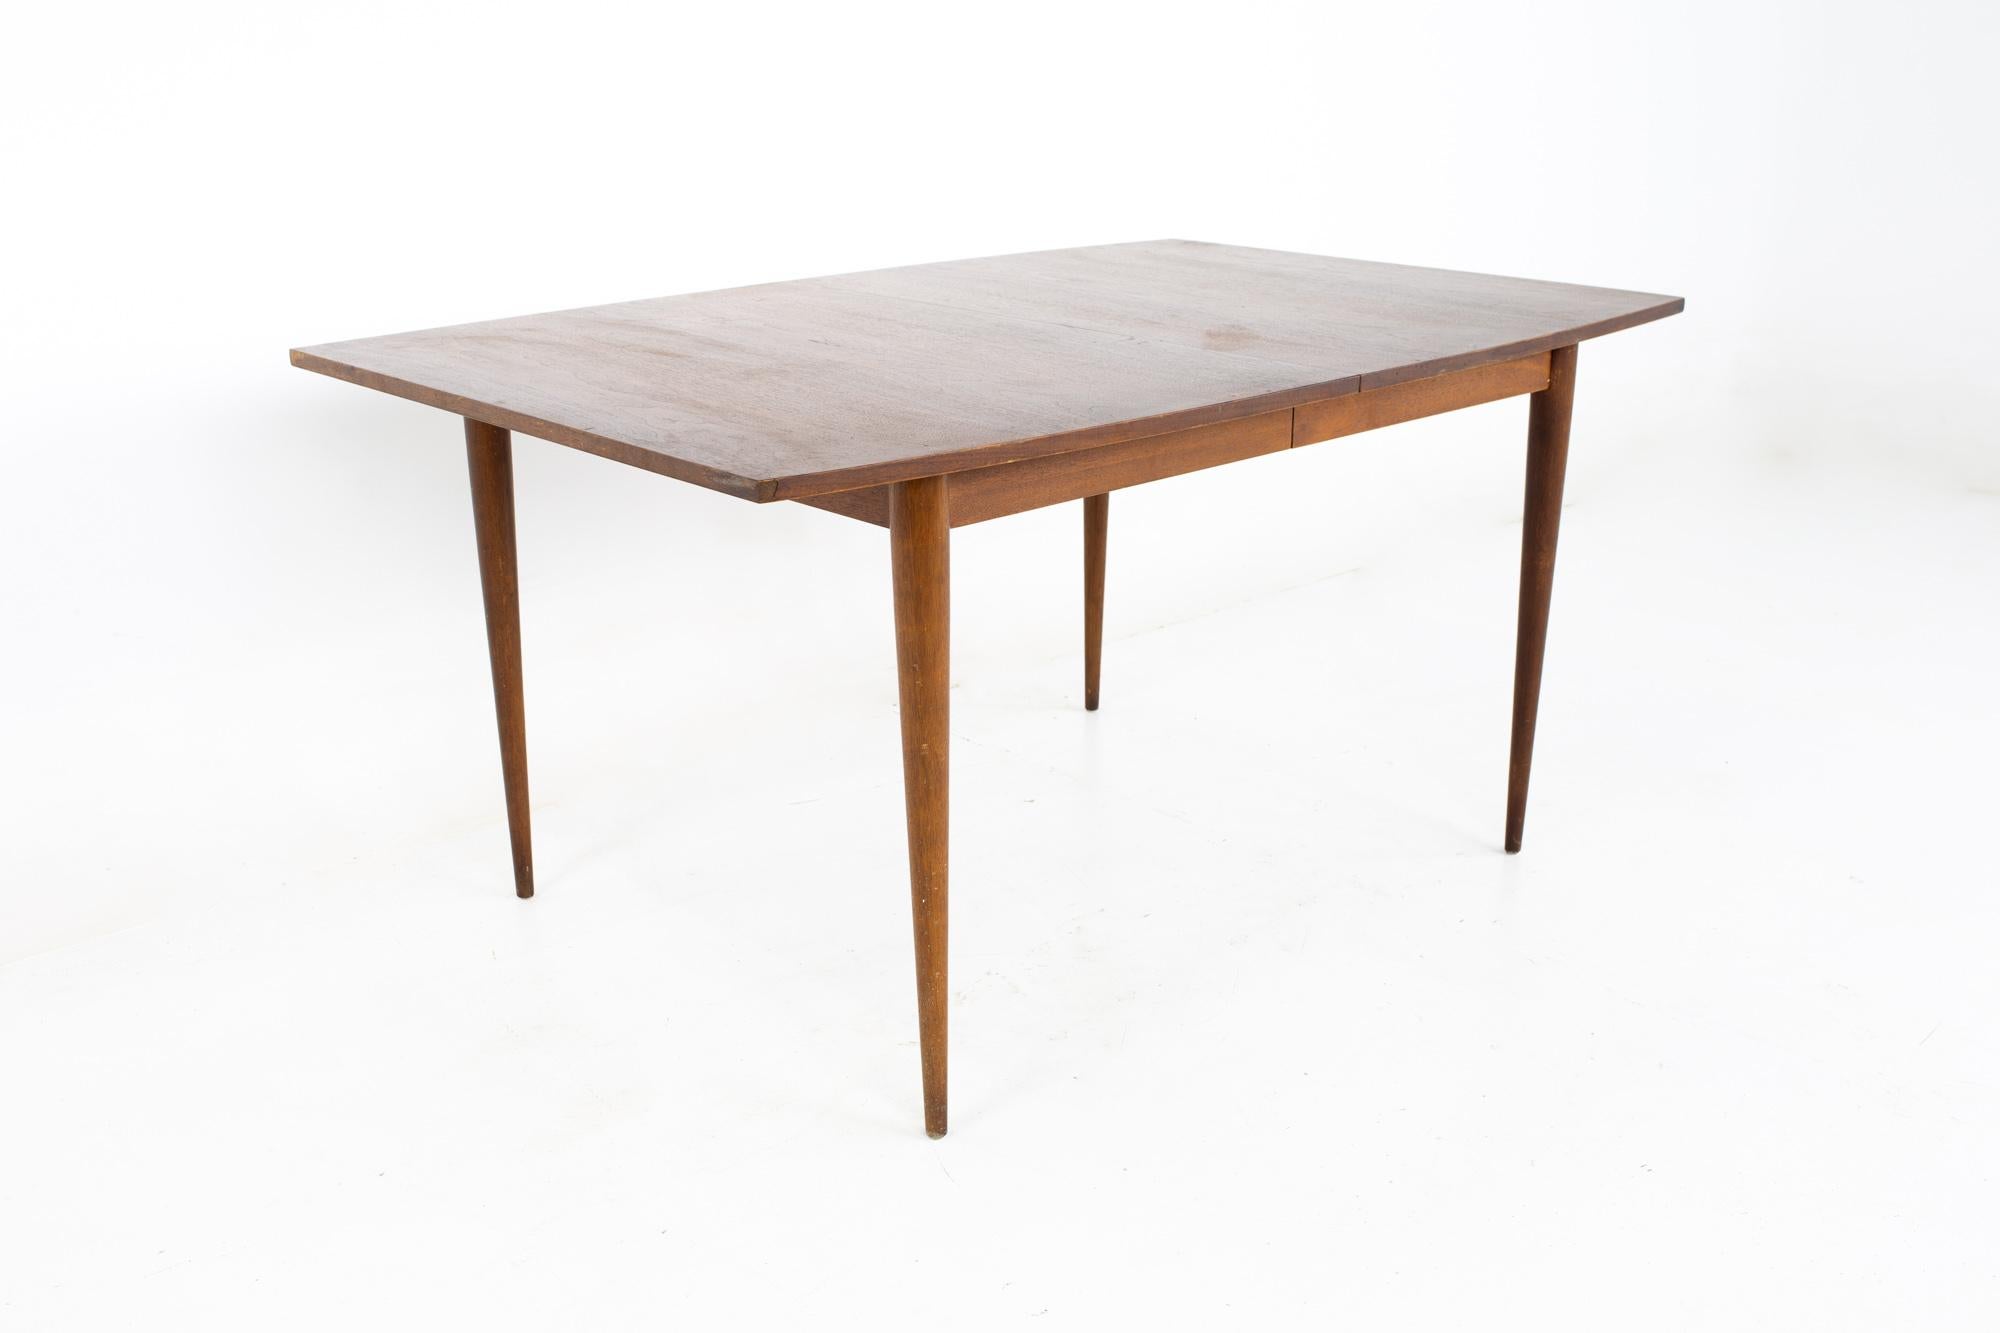 Broyhill Brasilia II mid century walnut dining table

This table measures: 60 wide x 40 deep x 30 high, with a chair clearance of 26 inches

All pieces of furniture can be had in what we call restored vintage condition. That means the piece is